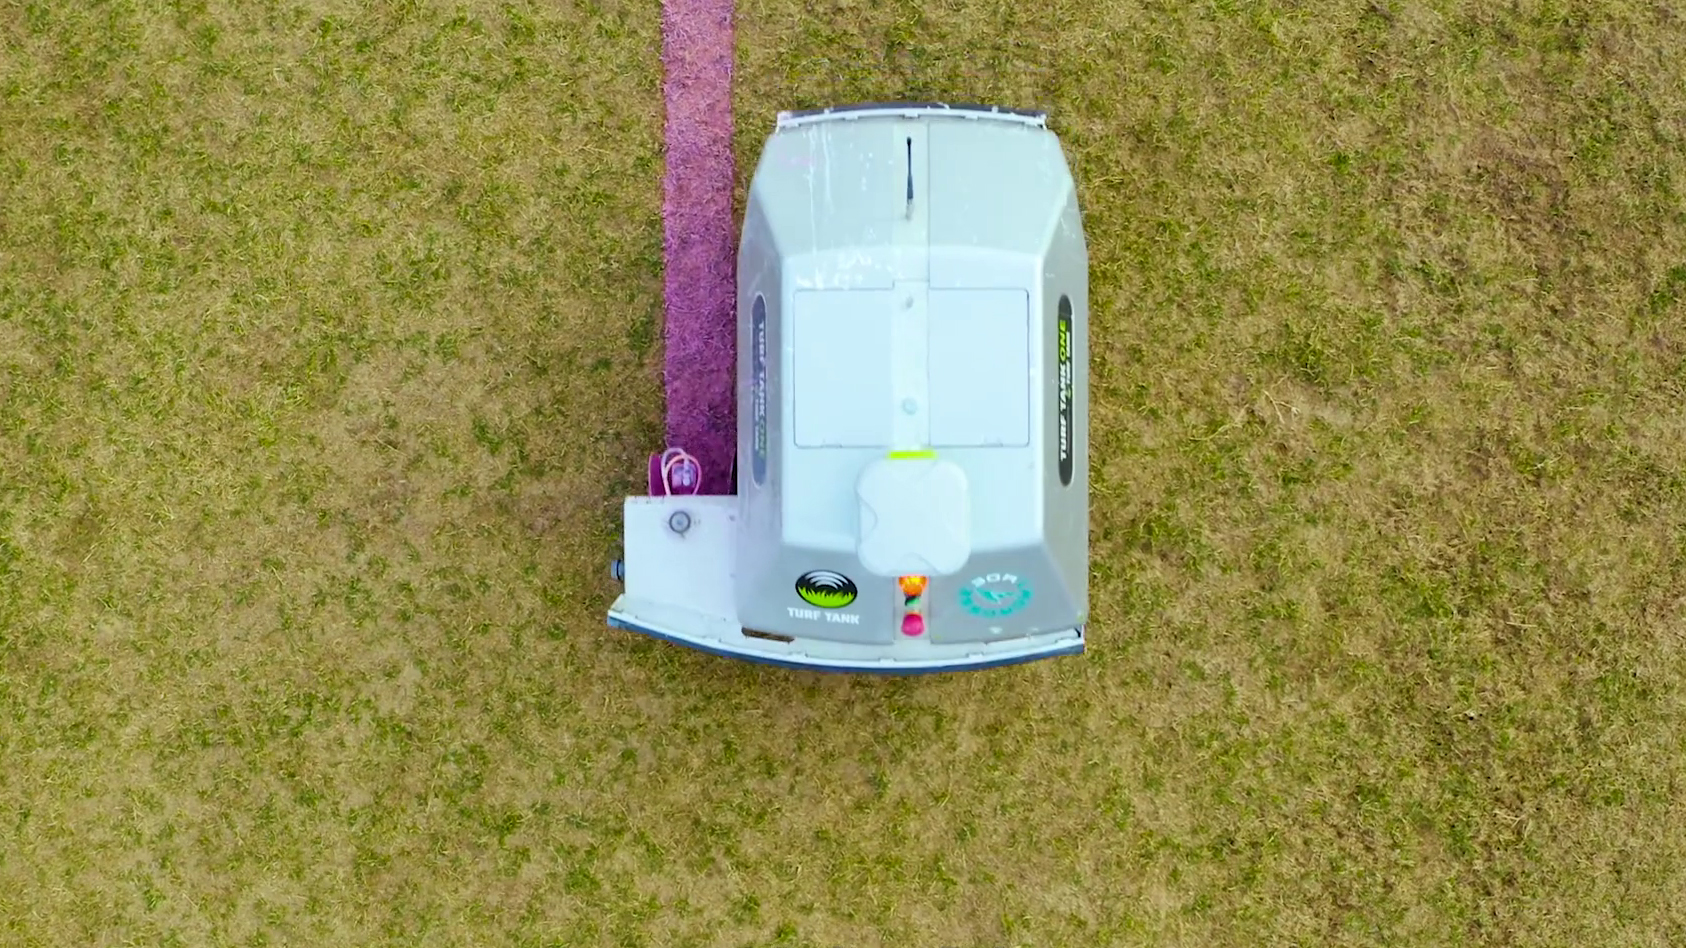 Bird view picture of Turf Tank robot painting a straight pink line